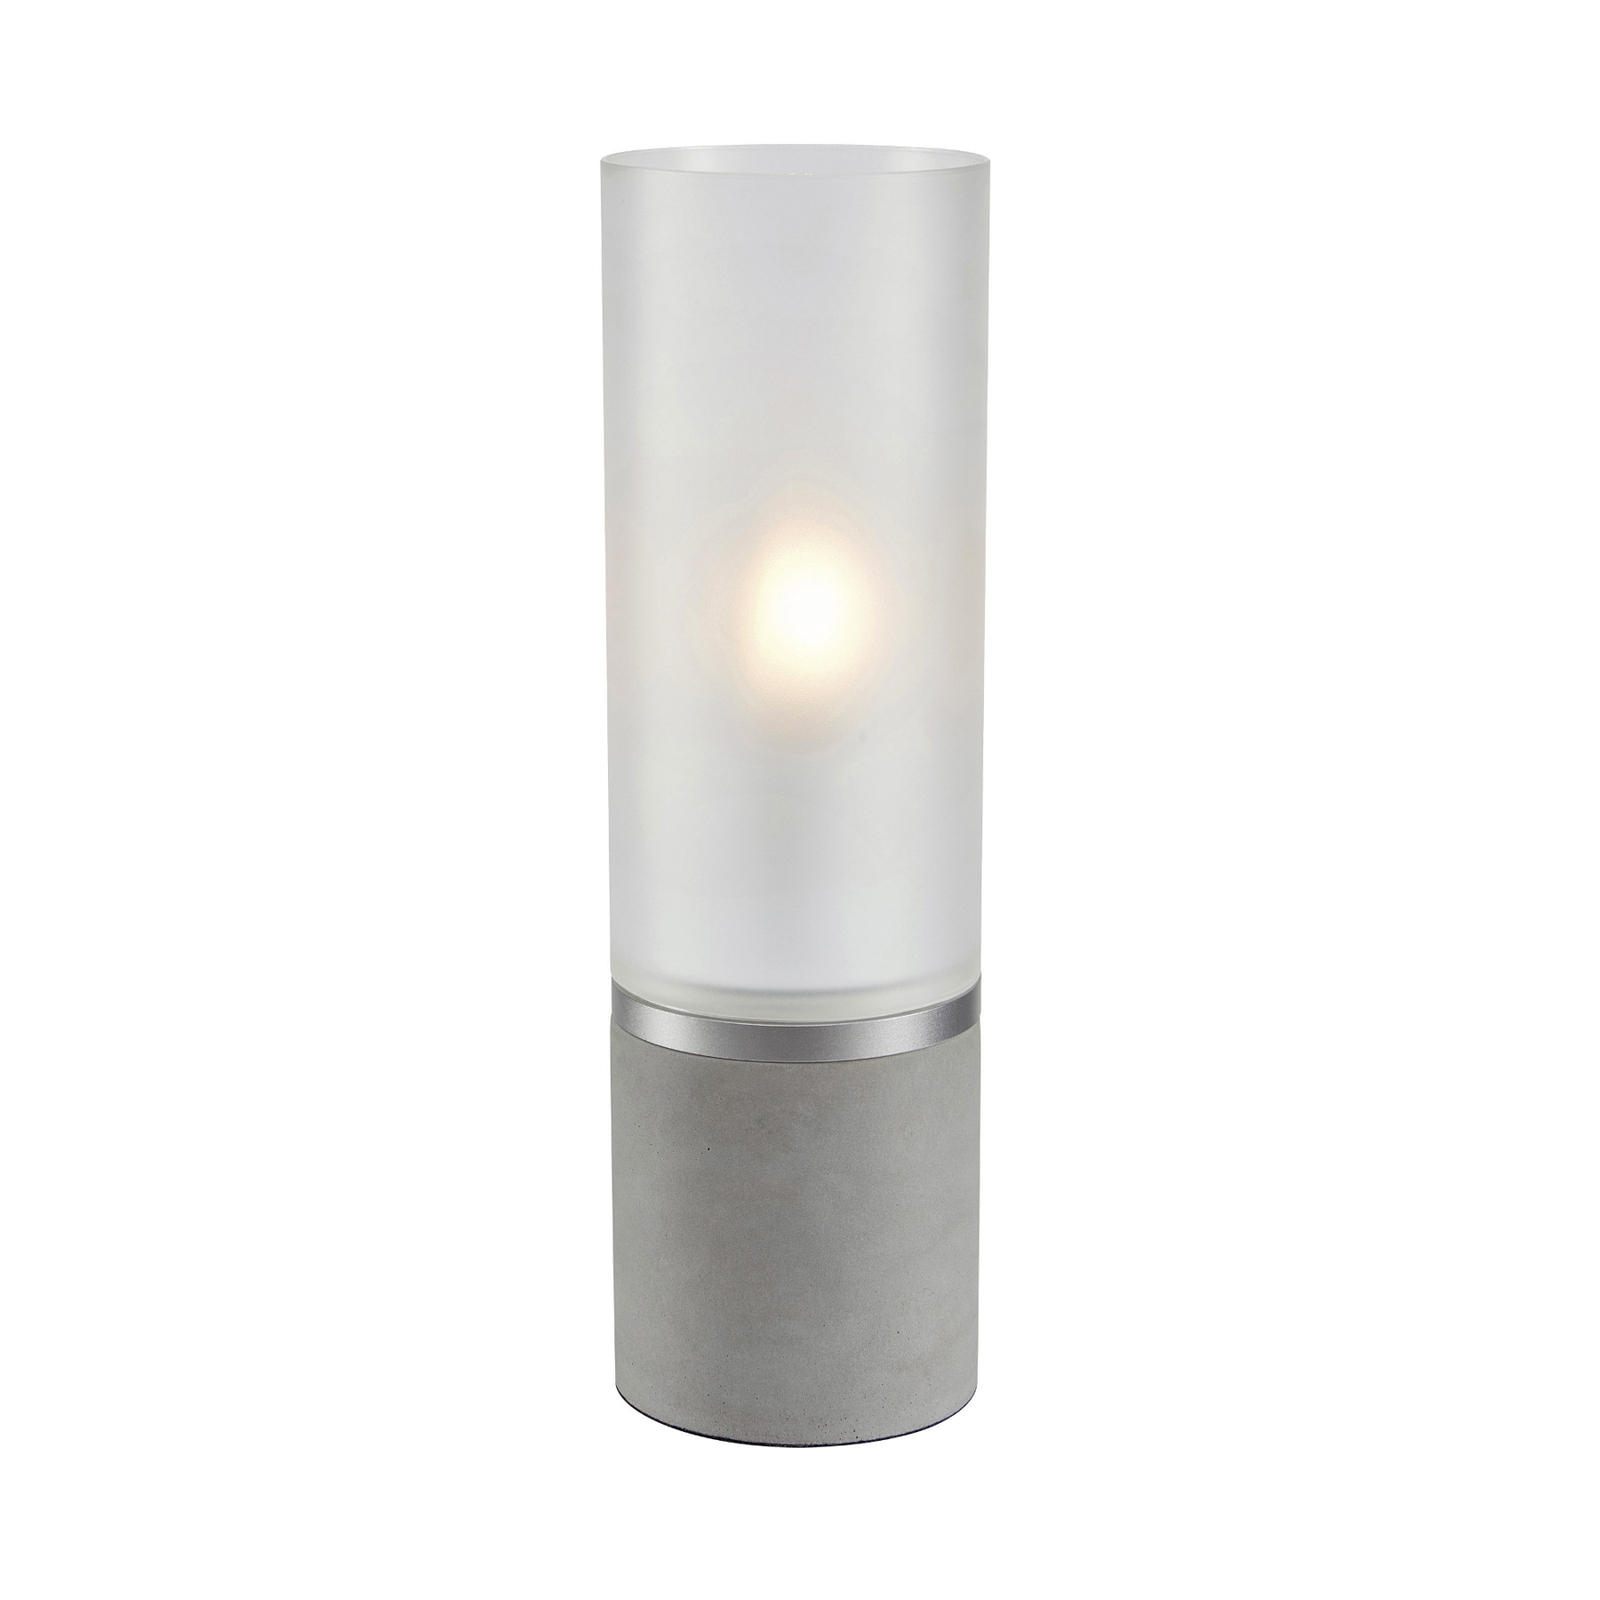 Table lamp Molo, concrete base frosted glass height 40cm